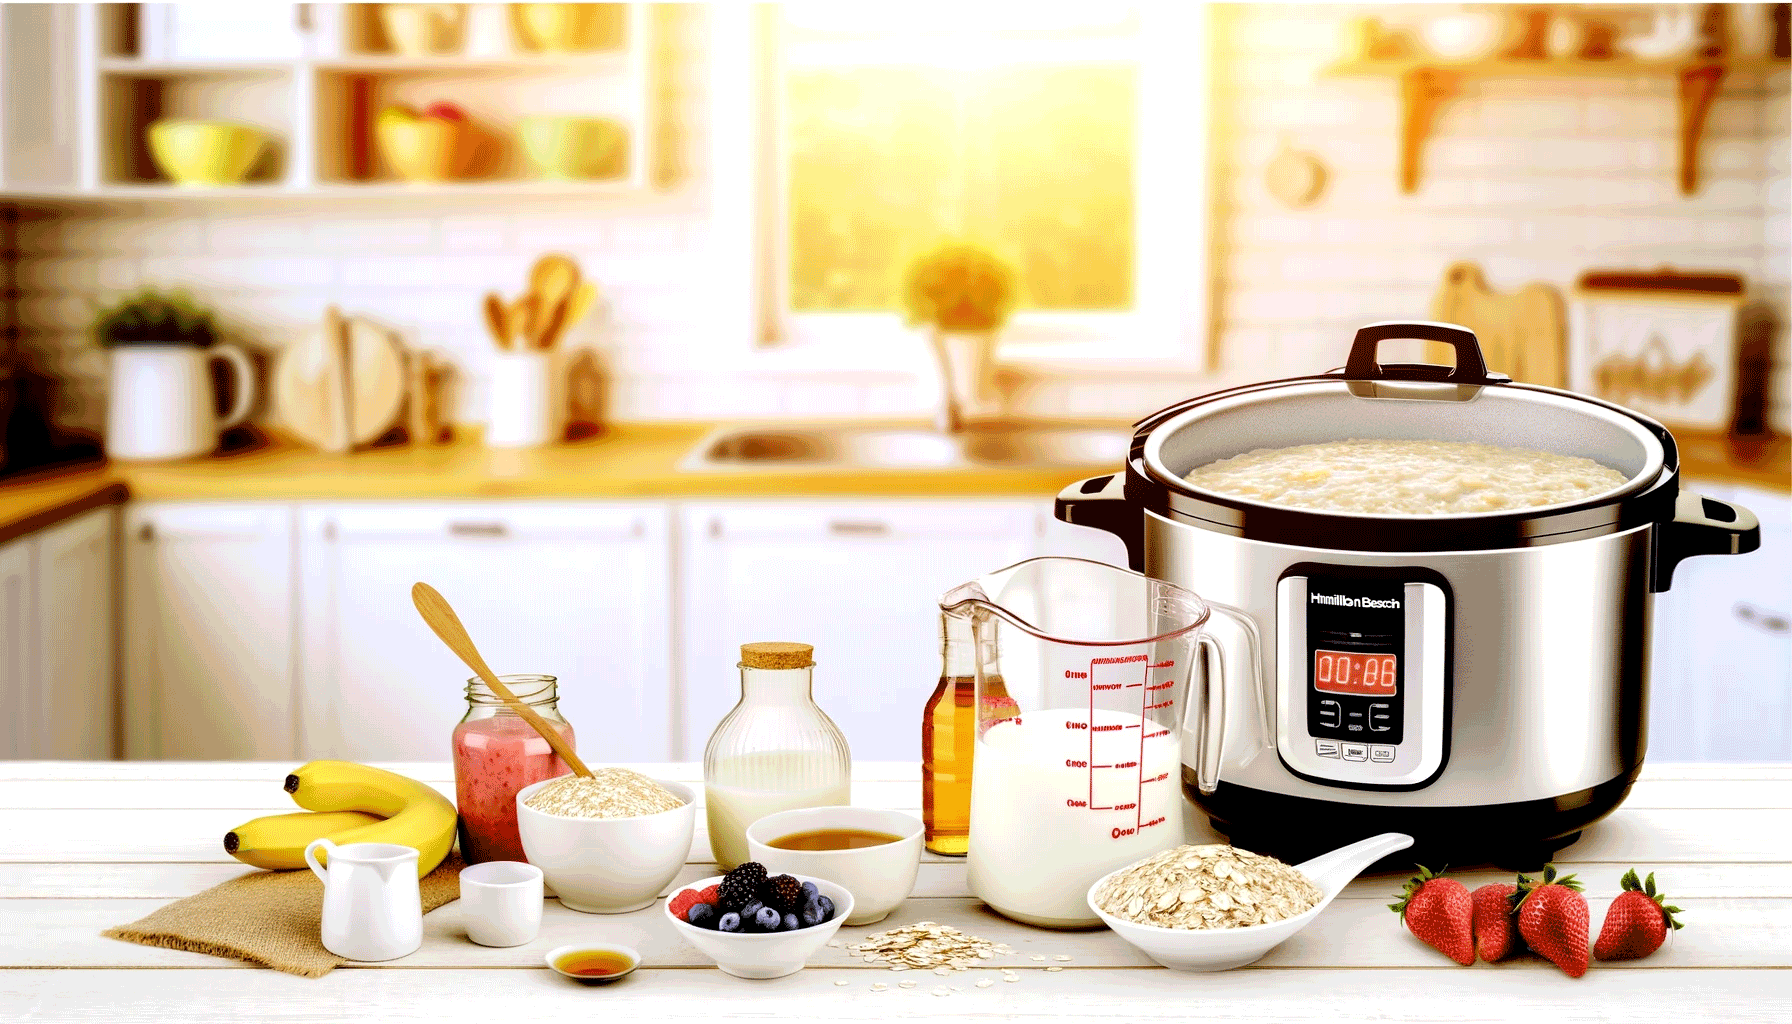 how to make oatmeal in hamilton beach rice cooker